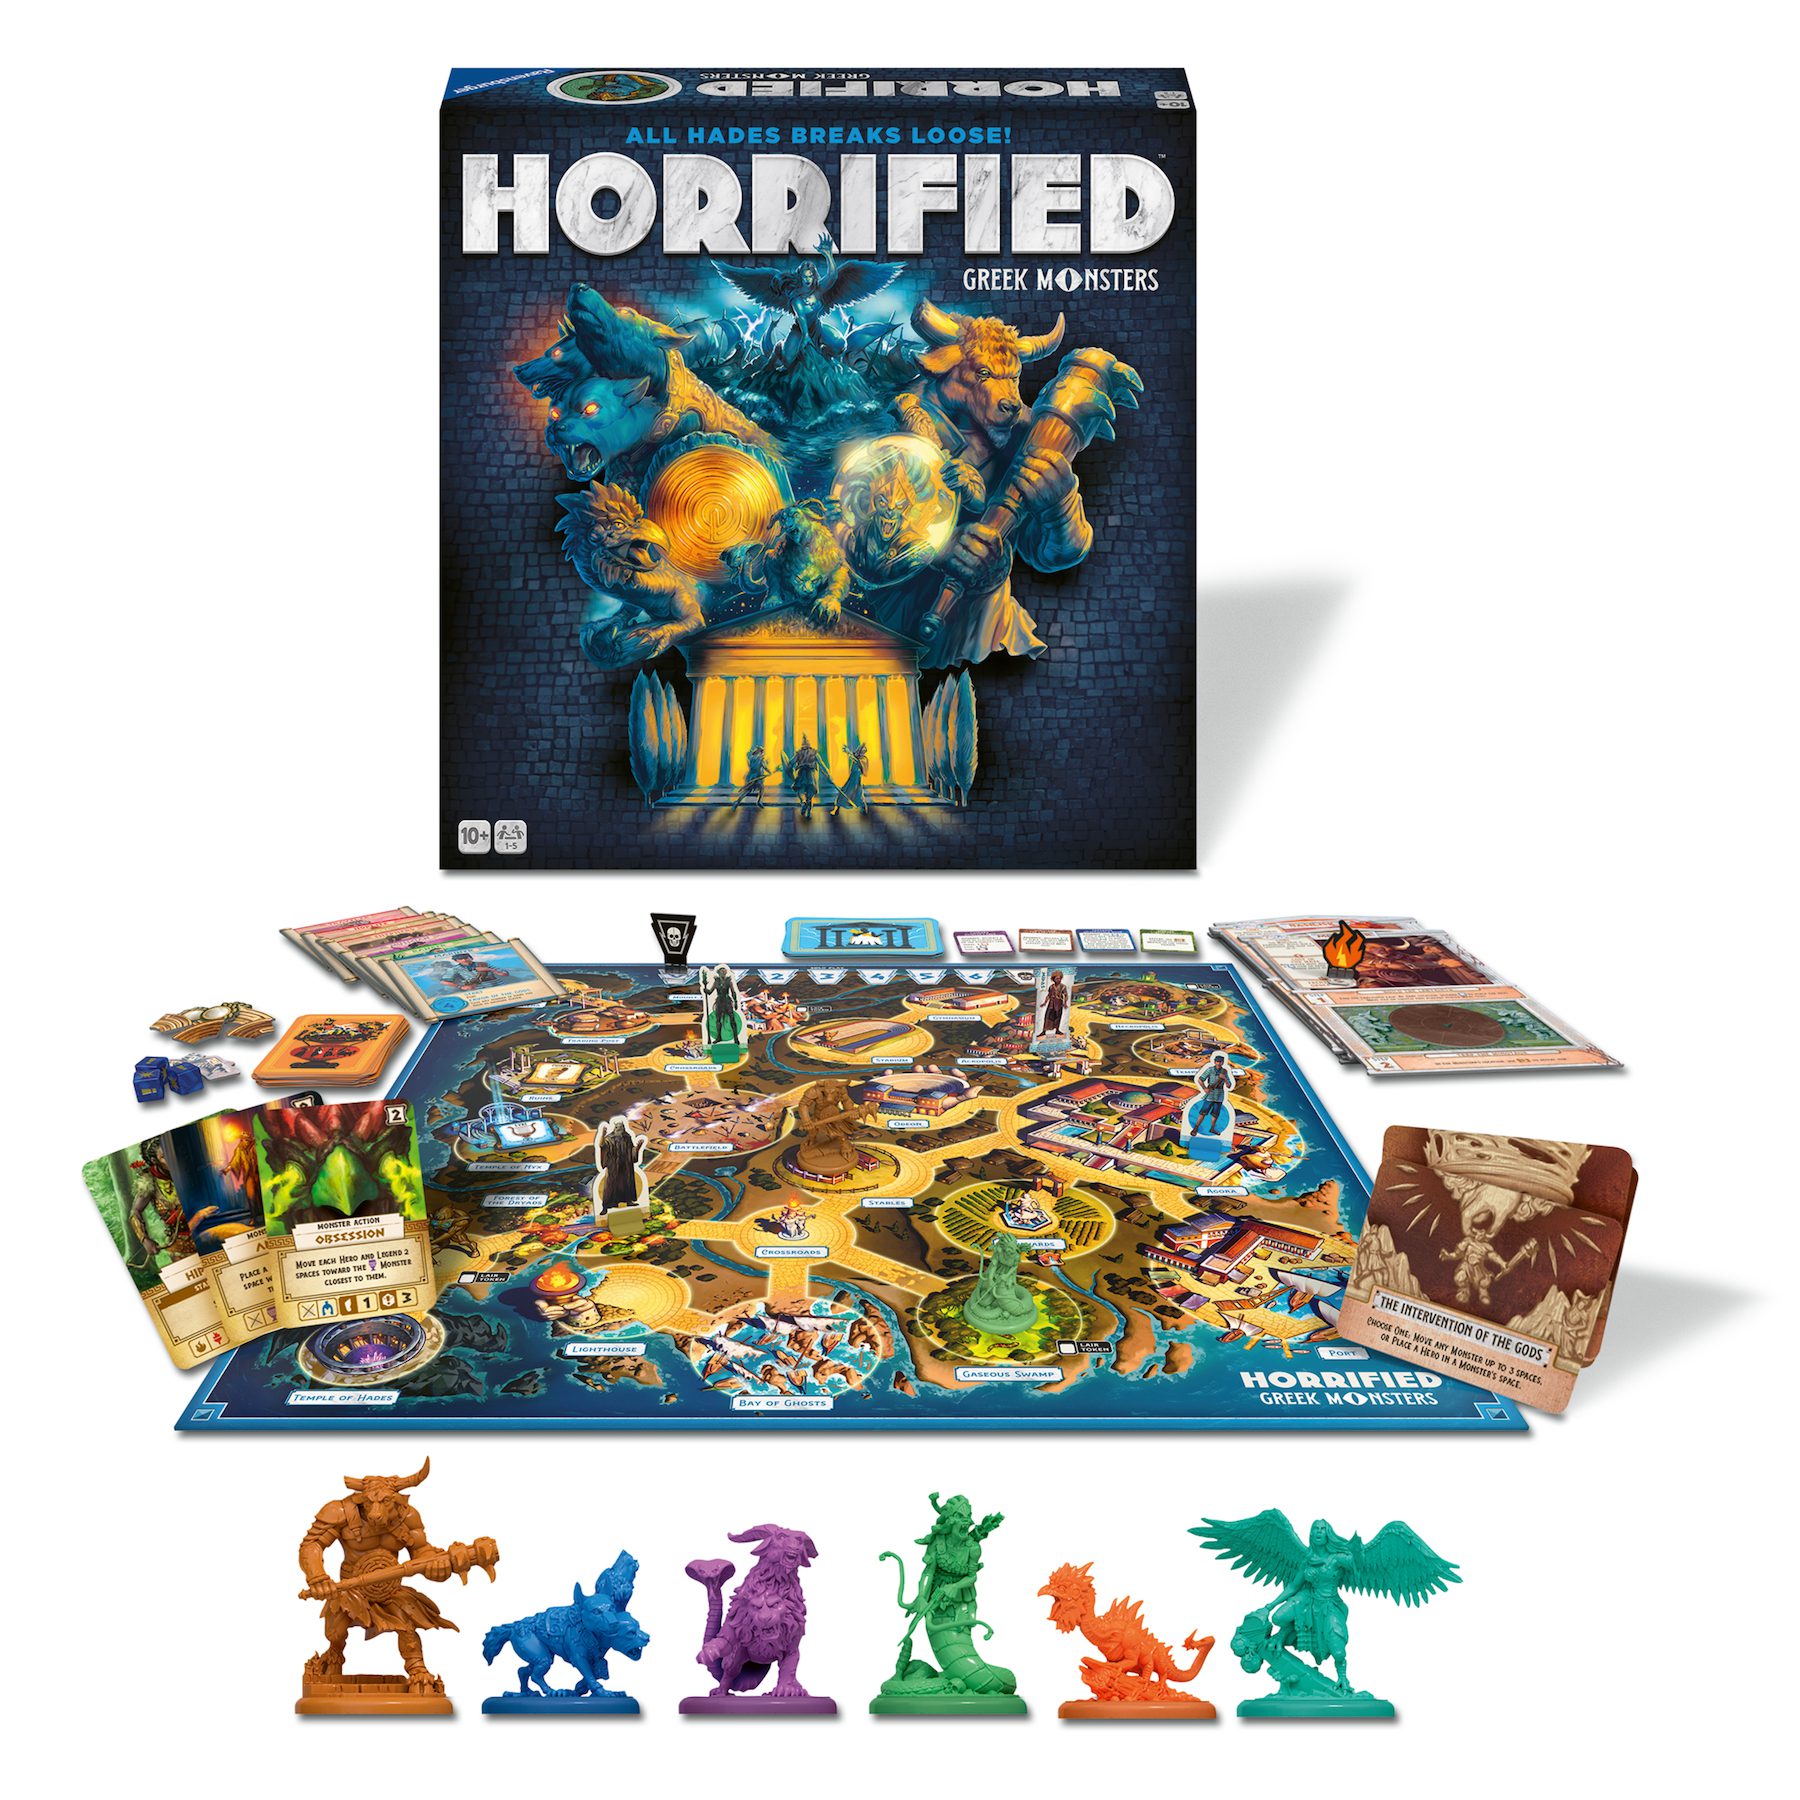 Horrified Greek Monsters box and contents